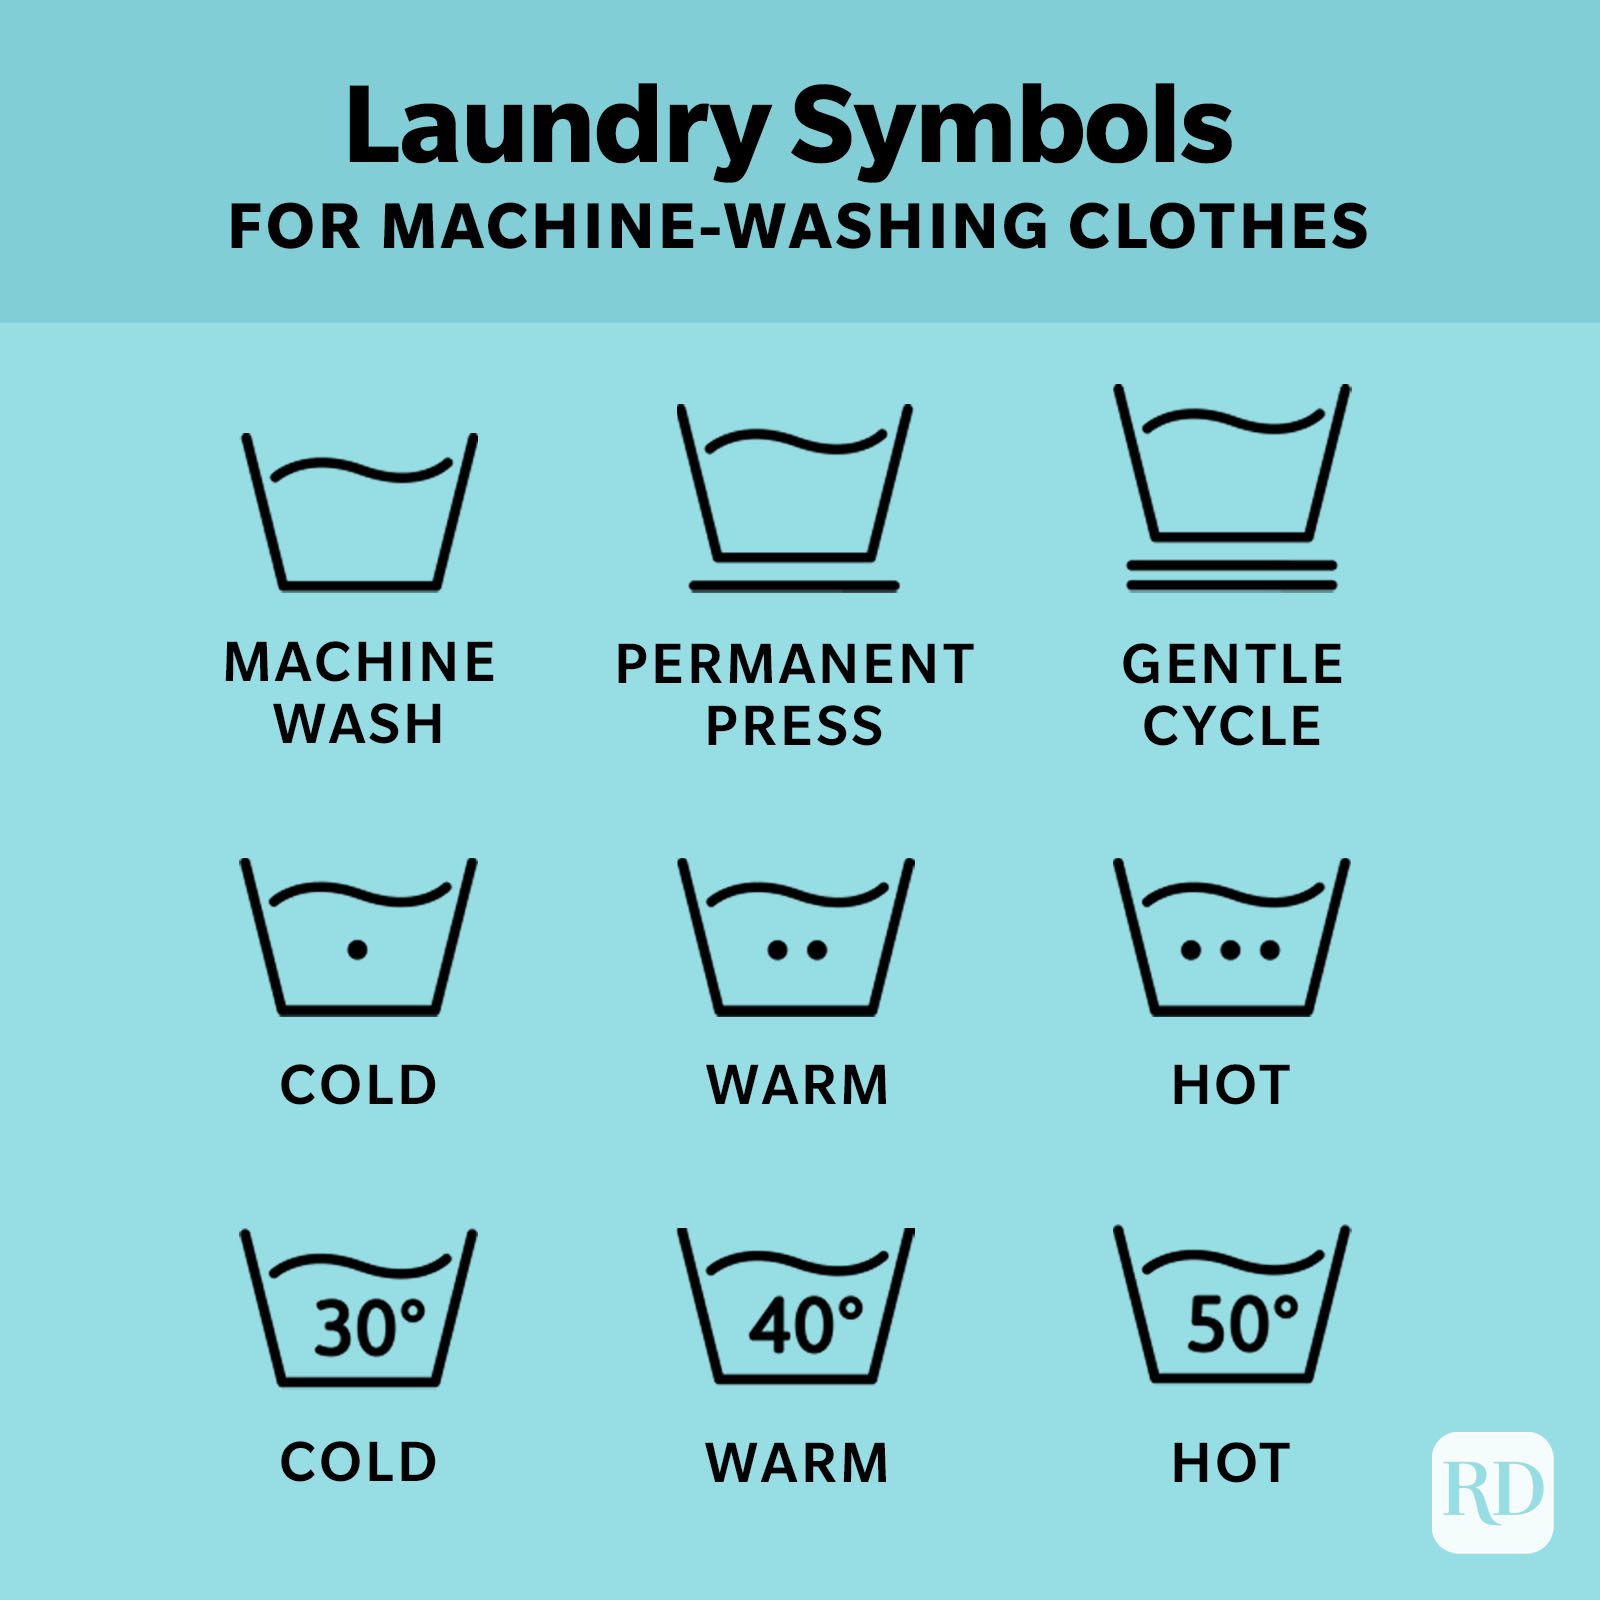 Your Guide to Laundry Symbols (Plus a Handy Washing Symbols Chart!)